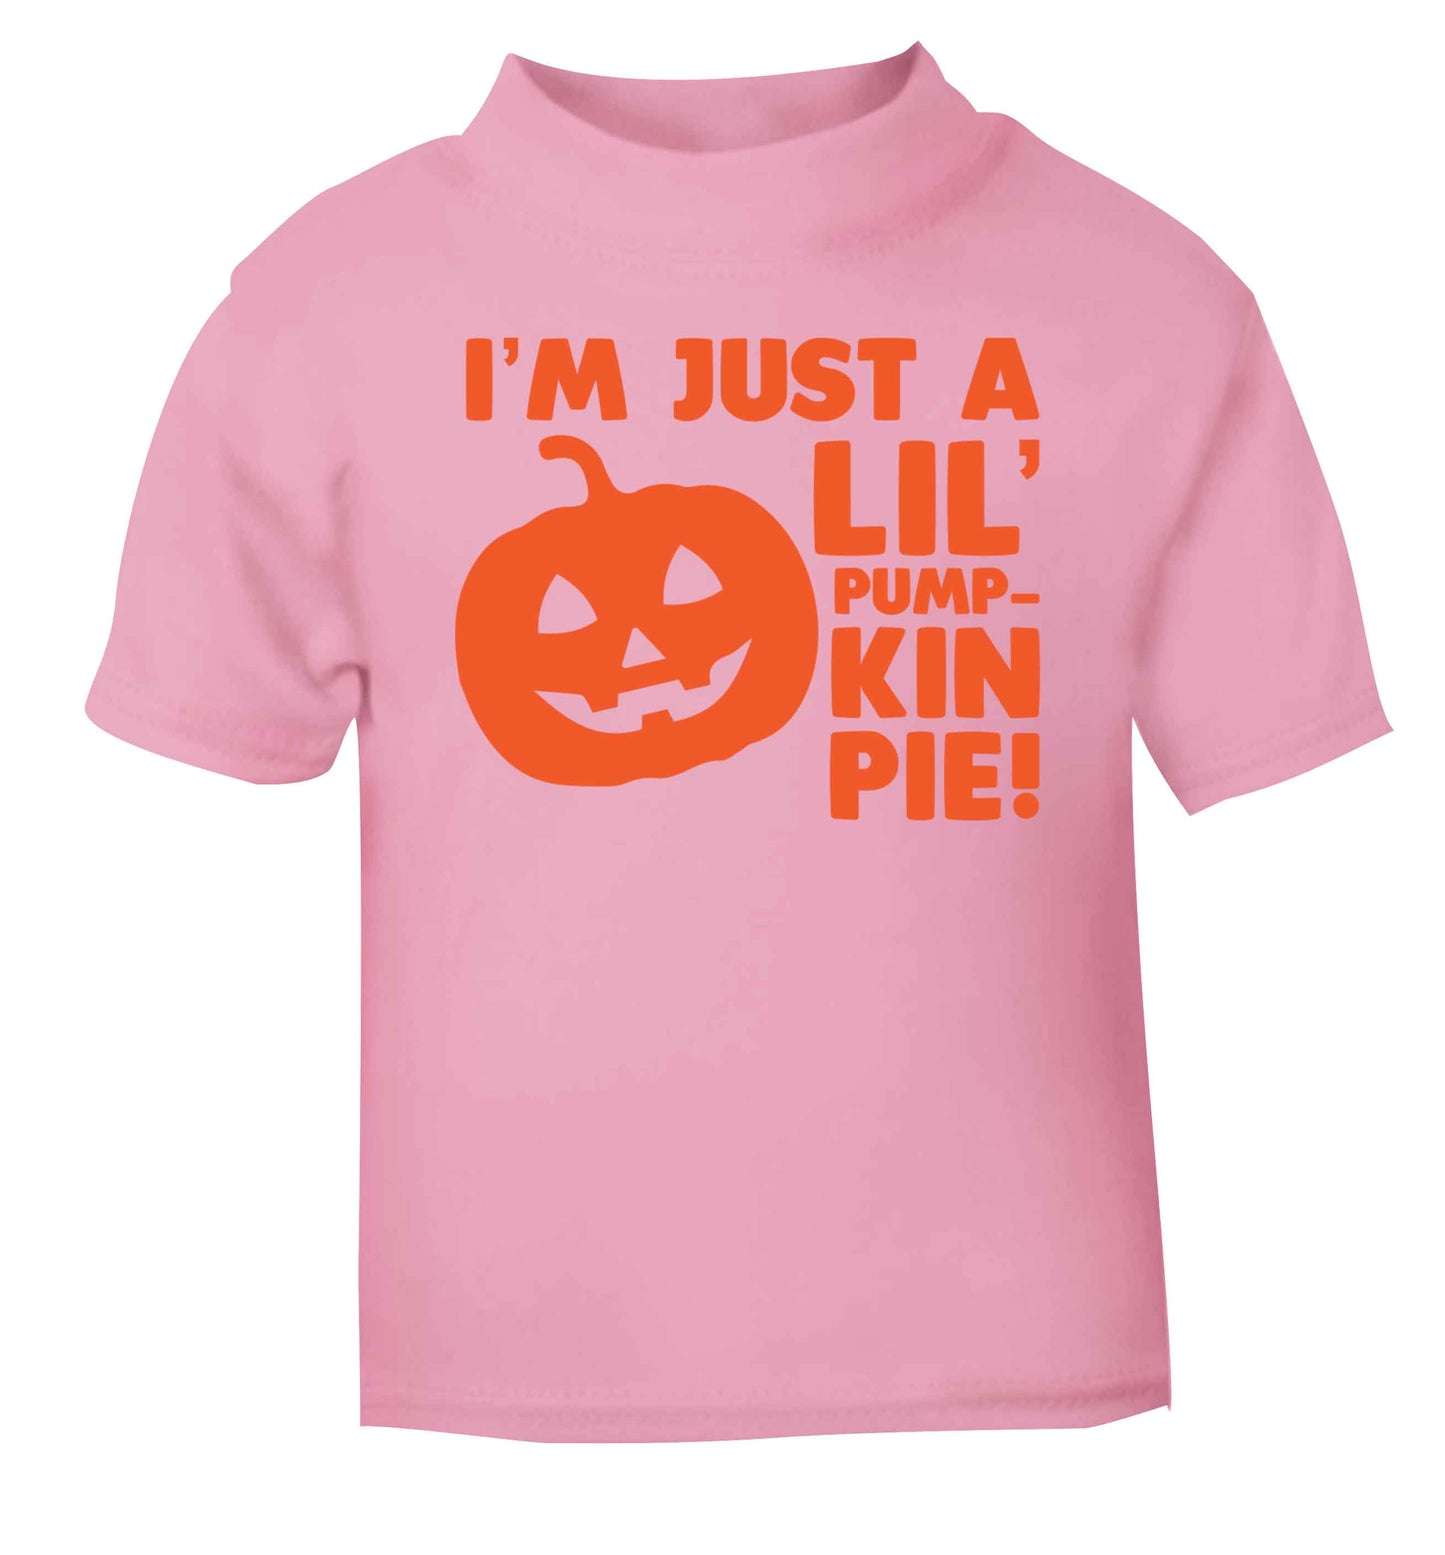 I'm just a lil' pumpkin pie light pink baby toddler Tshirt 2 Years